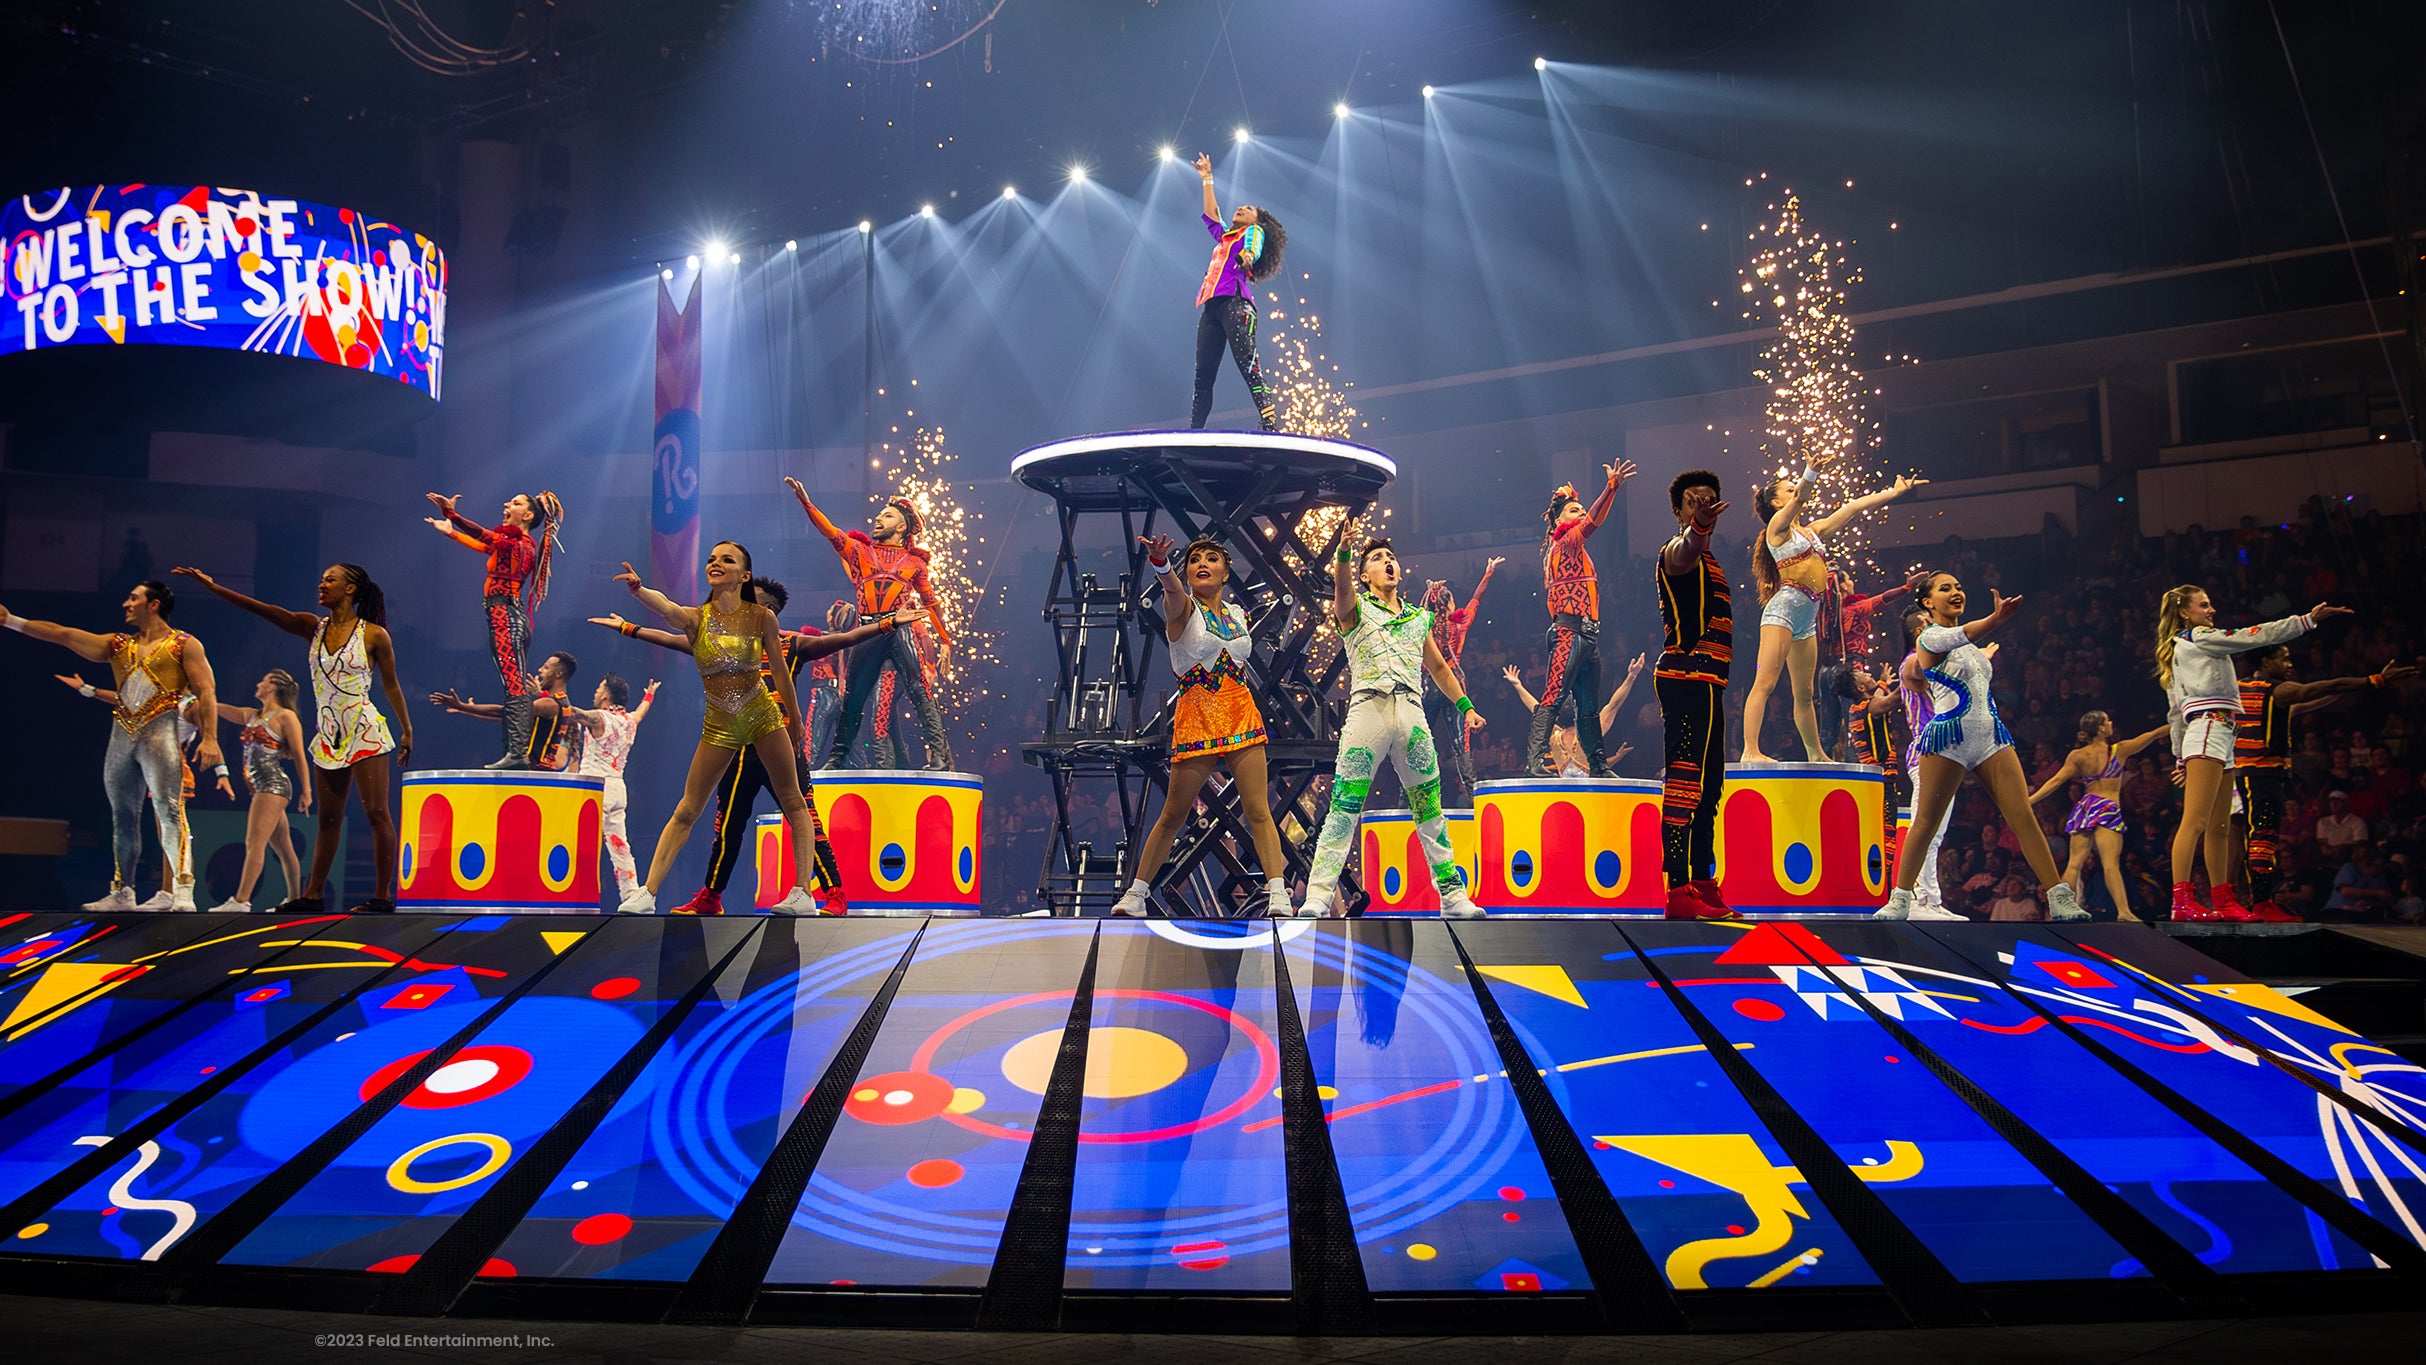 Ringling Bros. and Barnum & Bailey presents The Greatest Show On Earth in Indianapolis event information